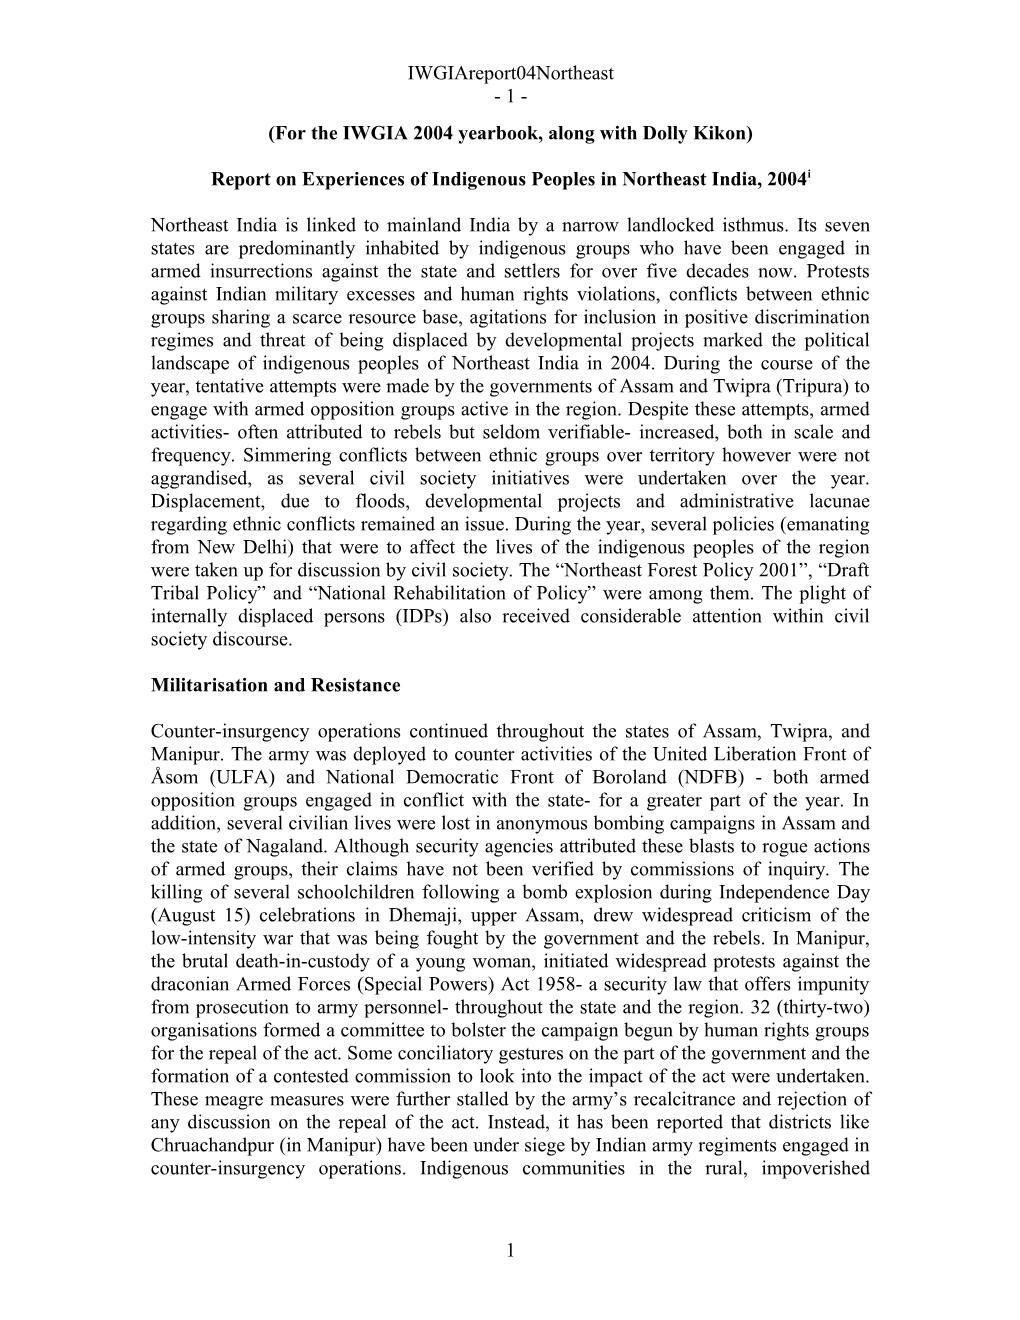 Report on Experiences of Indigenous Peoples in Northeast India, 2004